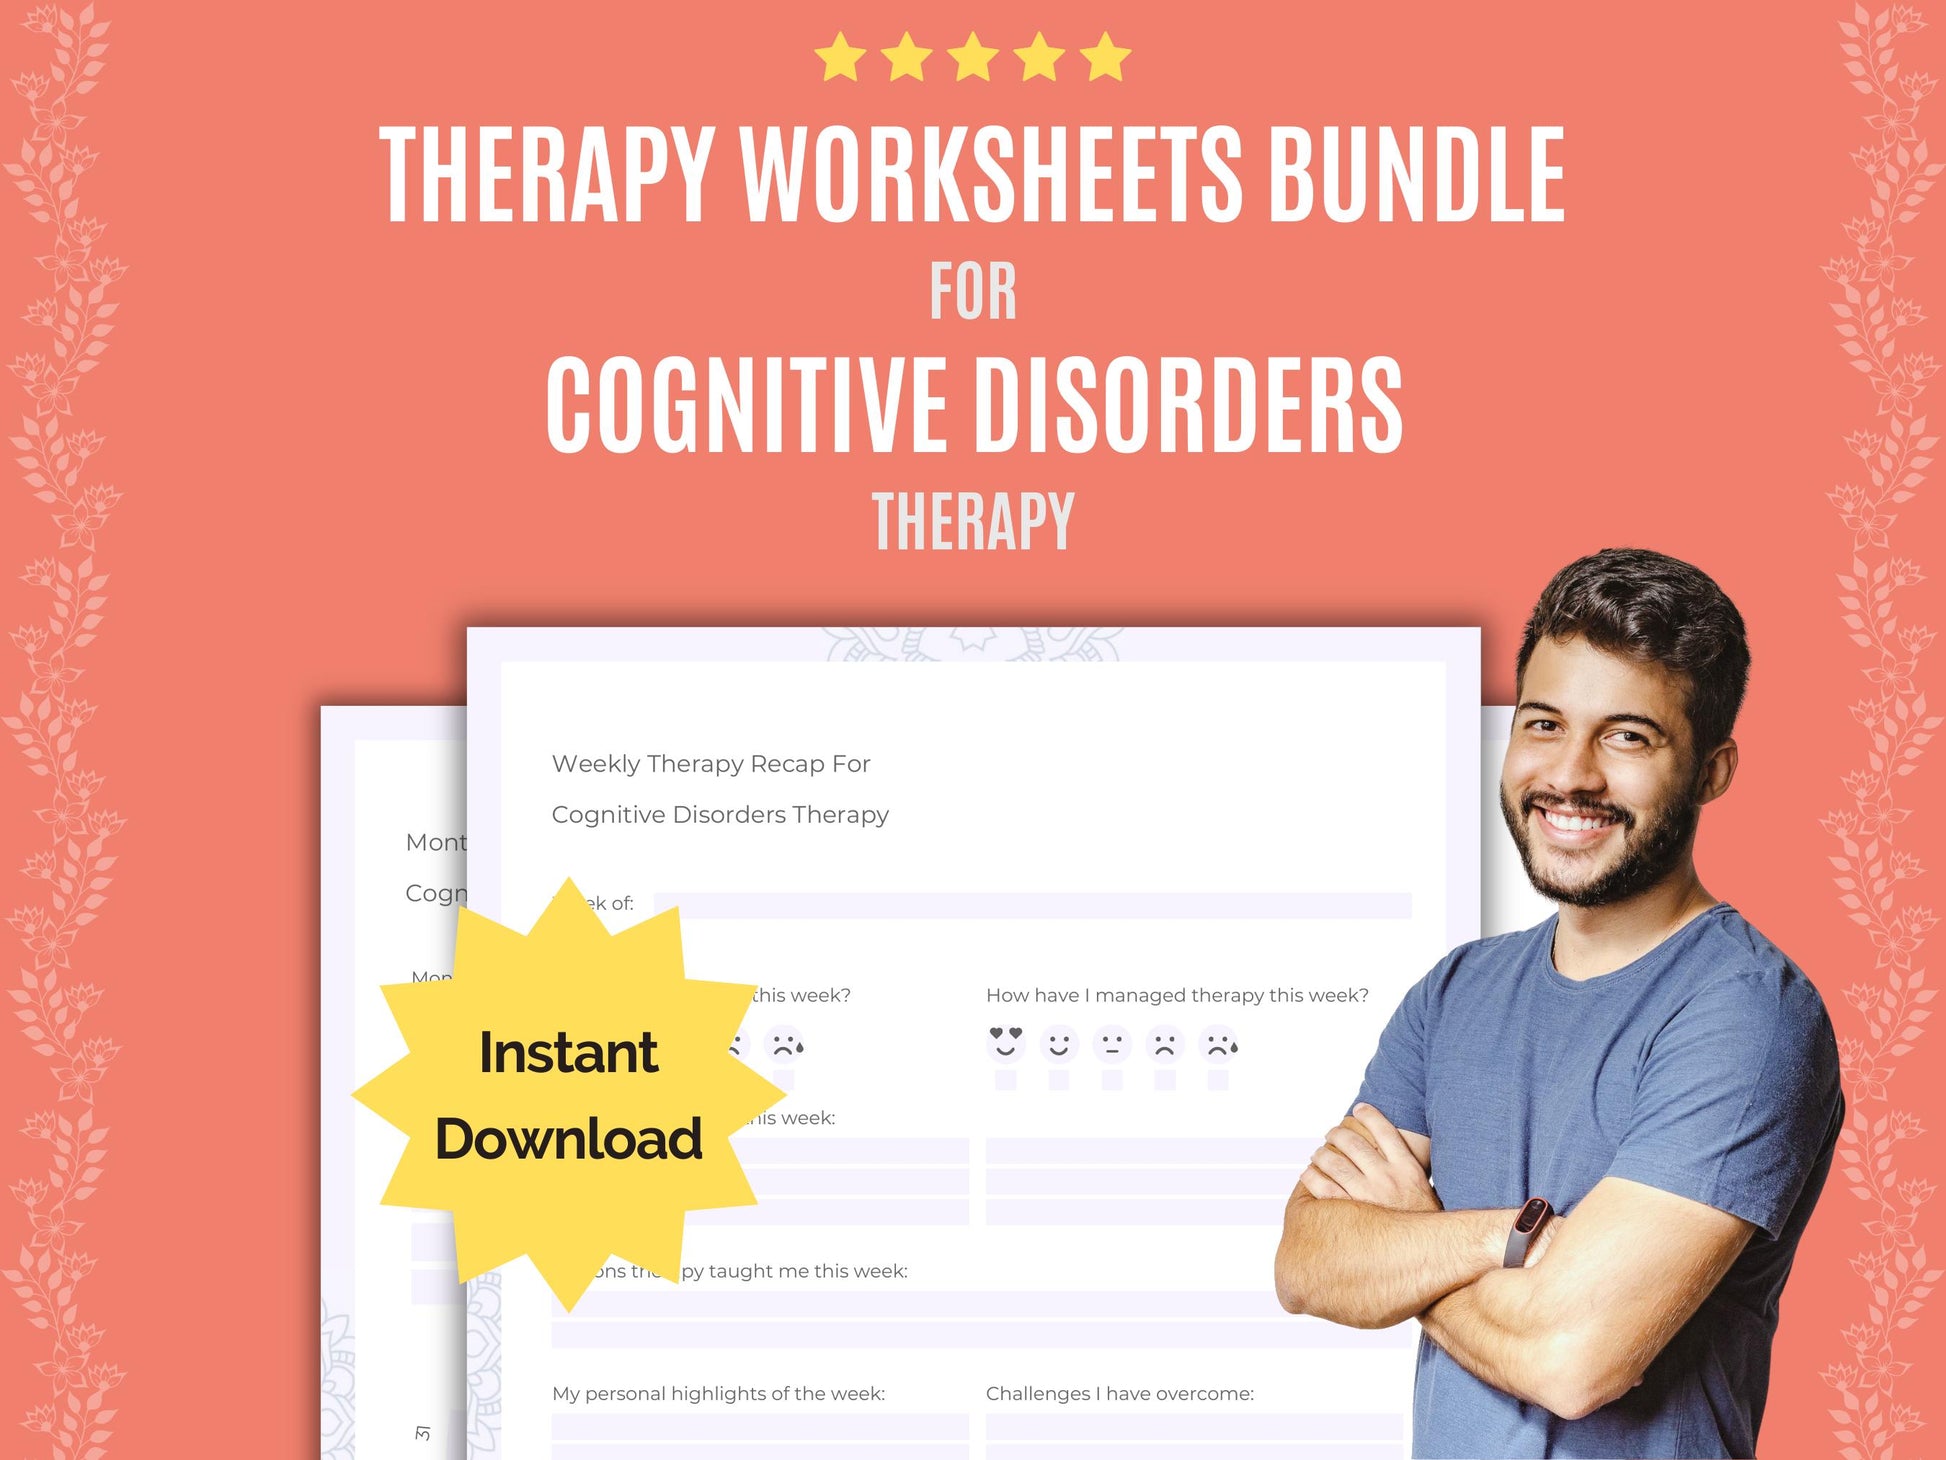 Cognitive Counseling, Disorders, Cognitive Journaling, Cognitive Planners, Goal Setting, Cognitive Notes, Cognitive Therapy, Cognitive Workbooks, Cognitive Tools, Cognitive Templates, Cognitive Resources, Cheat Sheet, Cognitive Journals